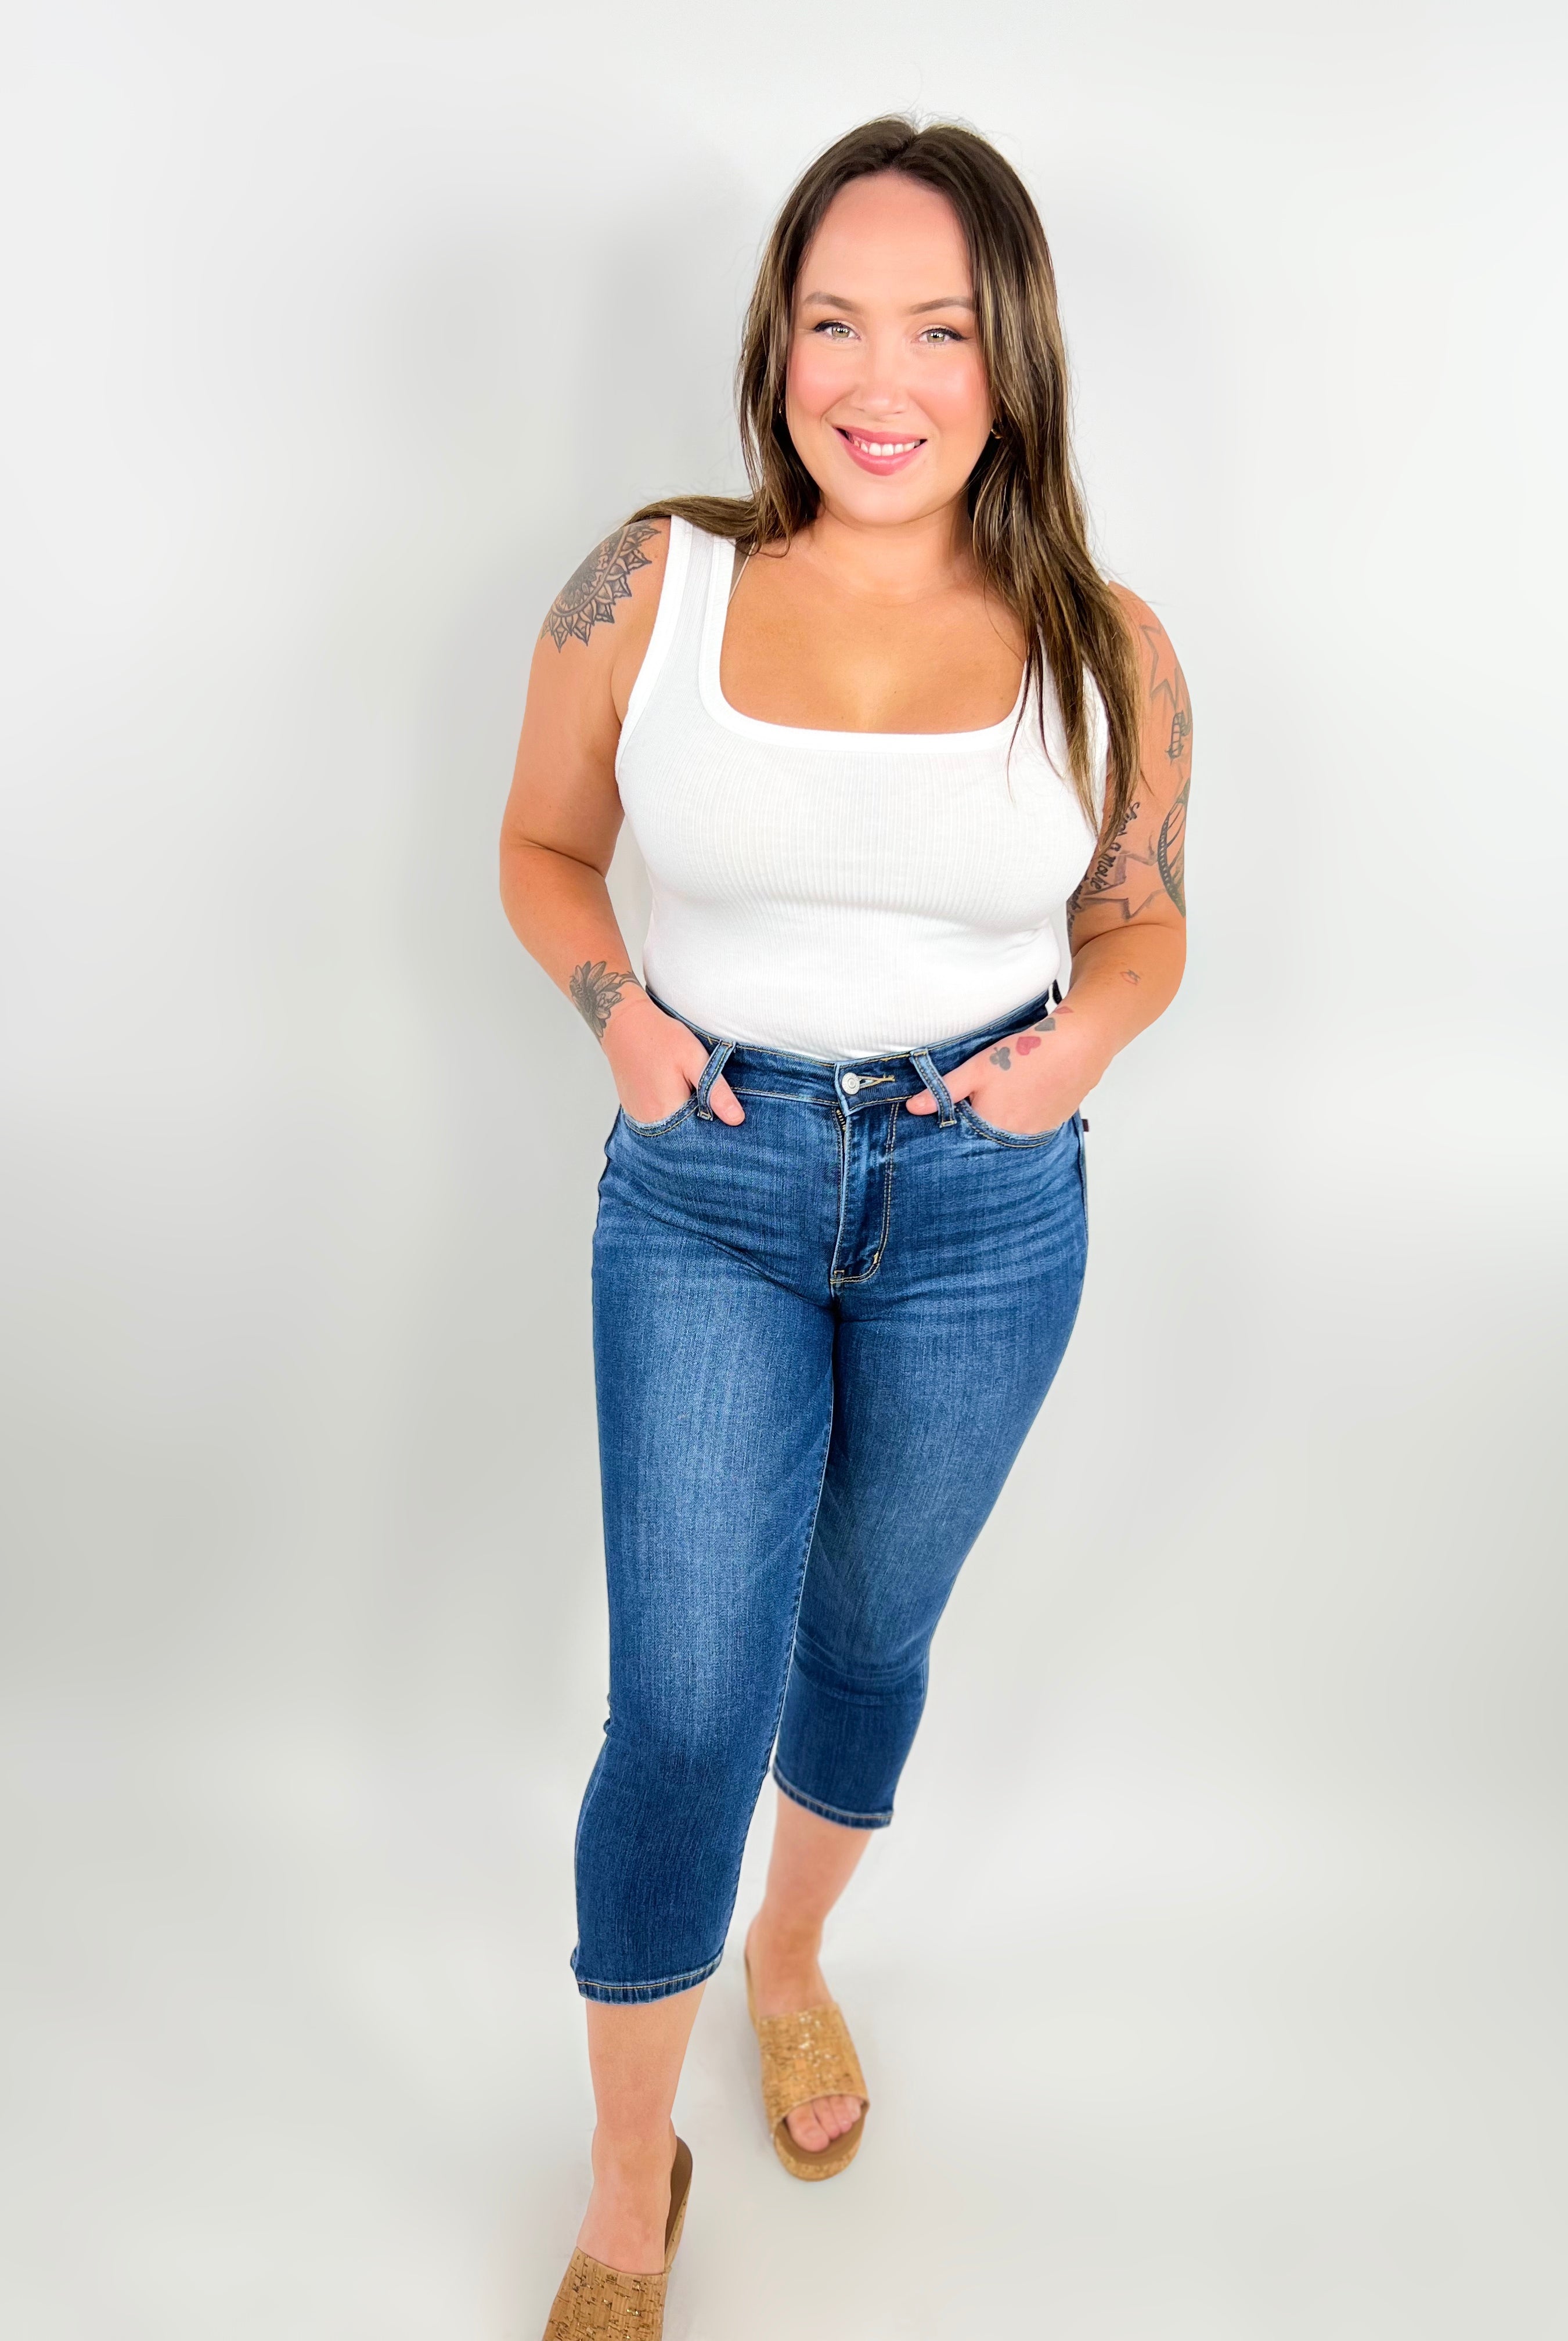 Part of Your World Capris by Judy Blue-190 Jeans-Judy Blue-Heathered Boho Boutique, Women's Fashion and Accessories in Palmetto, FL